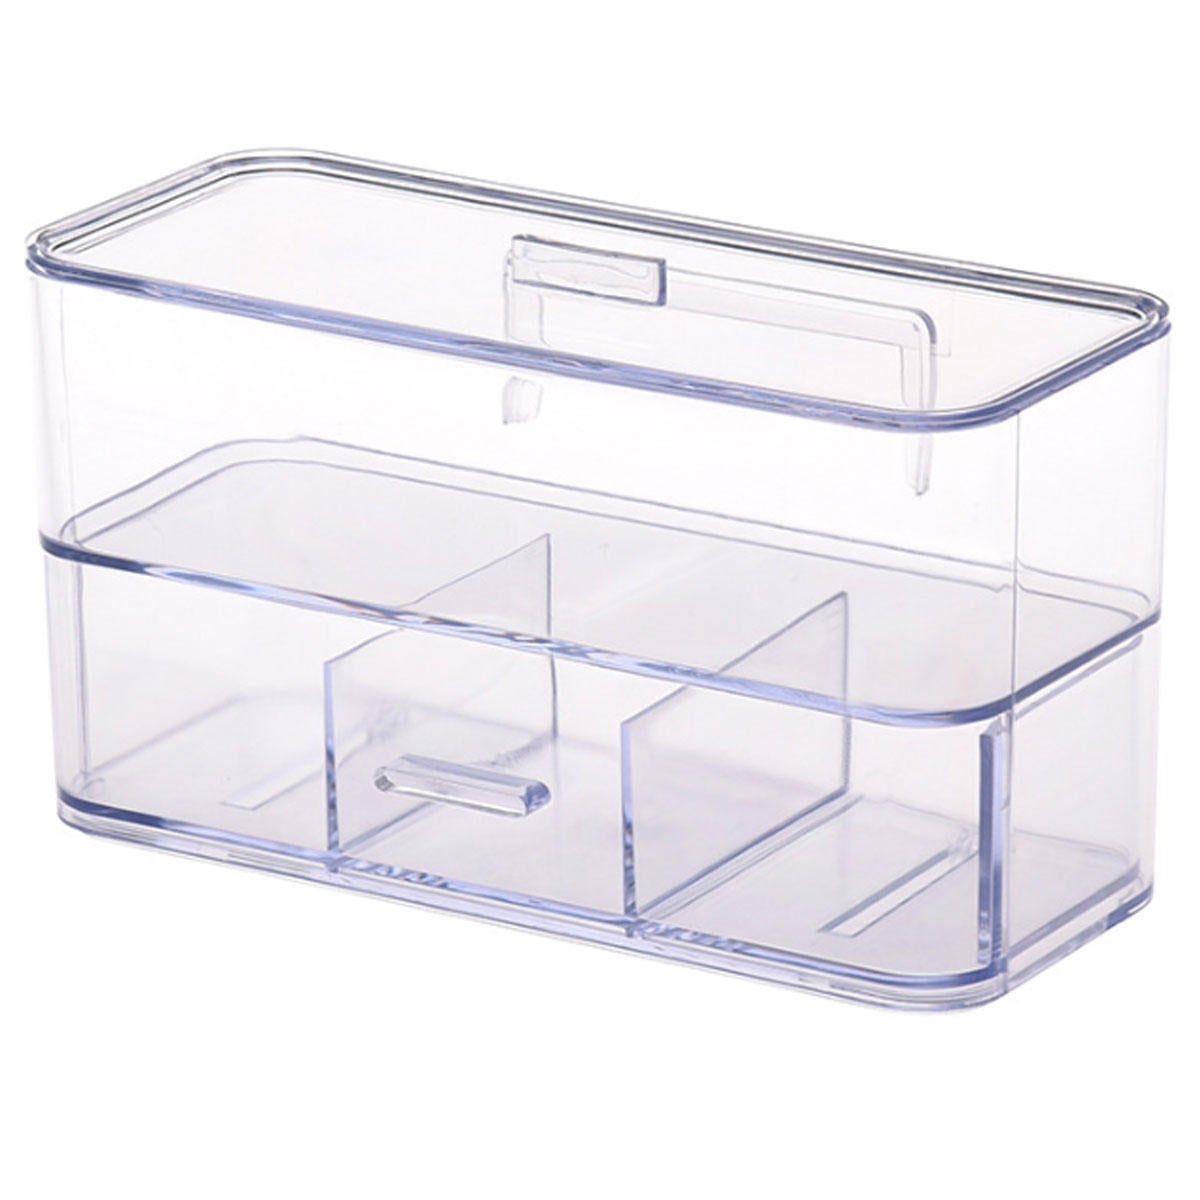 Cosmetic Organizer Storage Clear Makeup Drawers Holder Case Jewelry Box